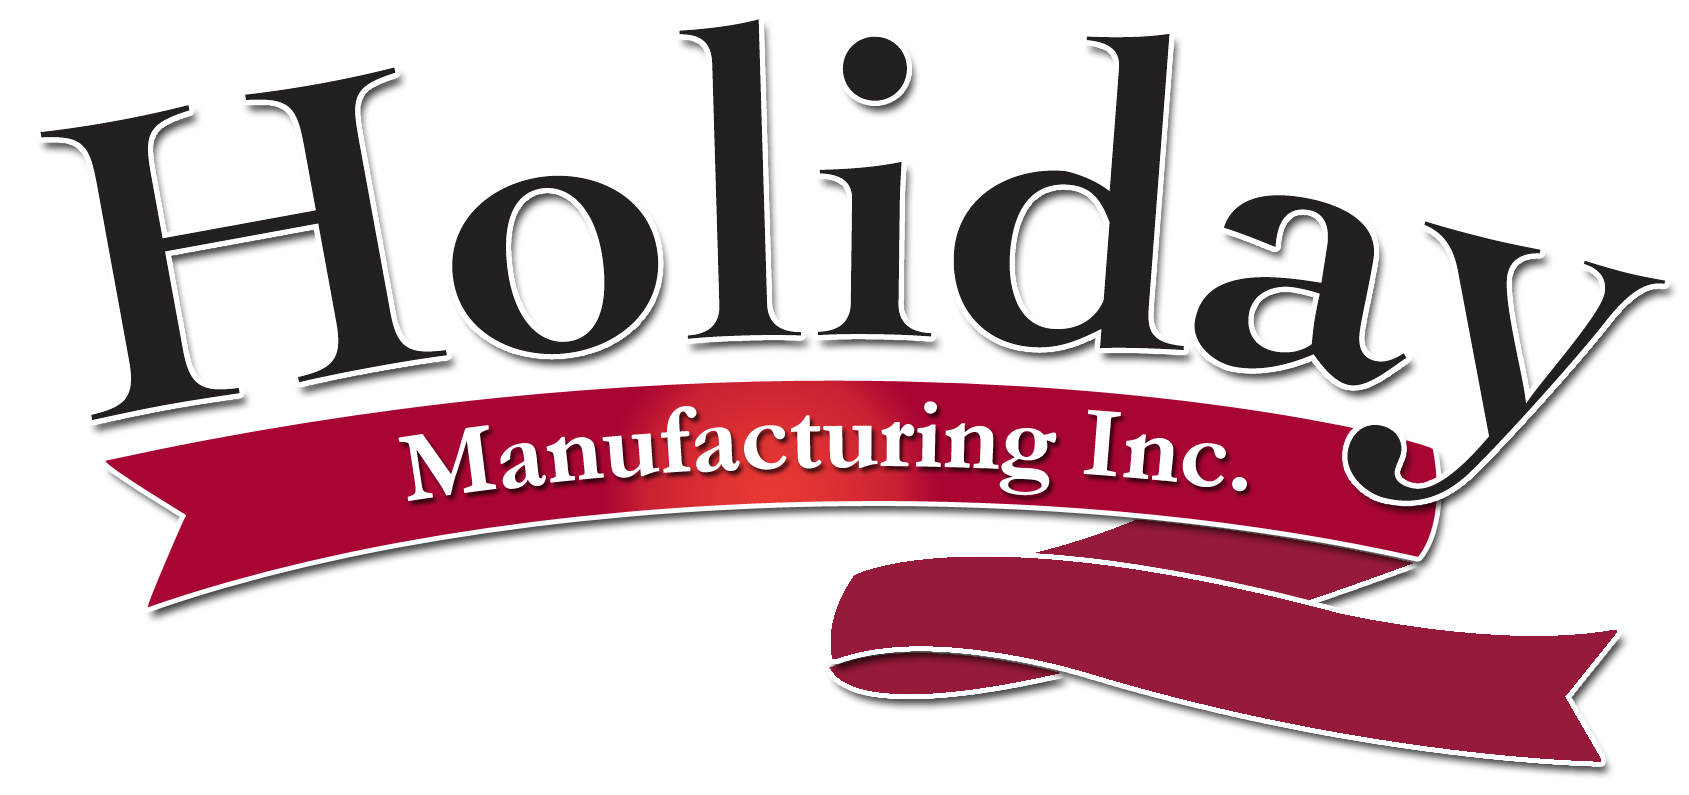 Holiday Manufacturing, INC